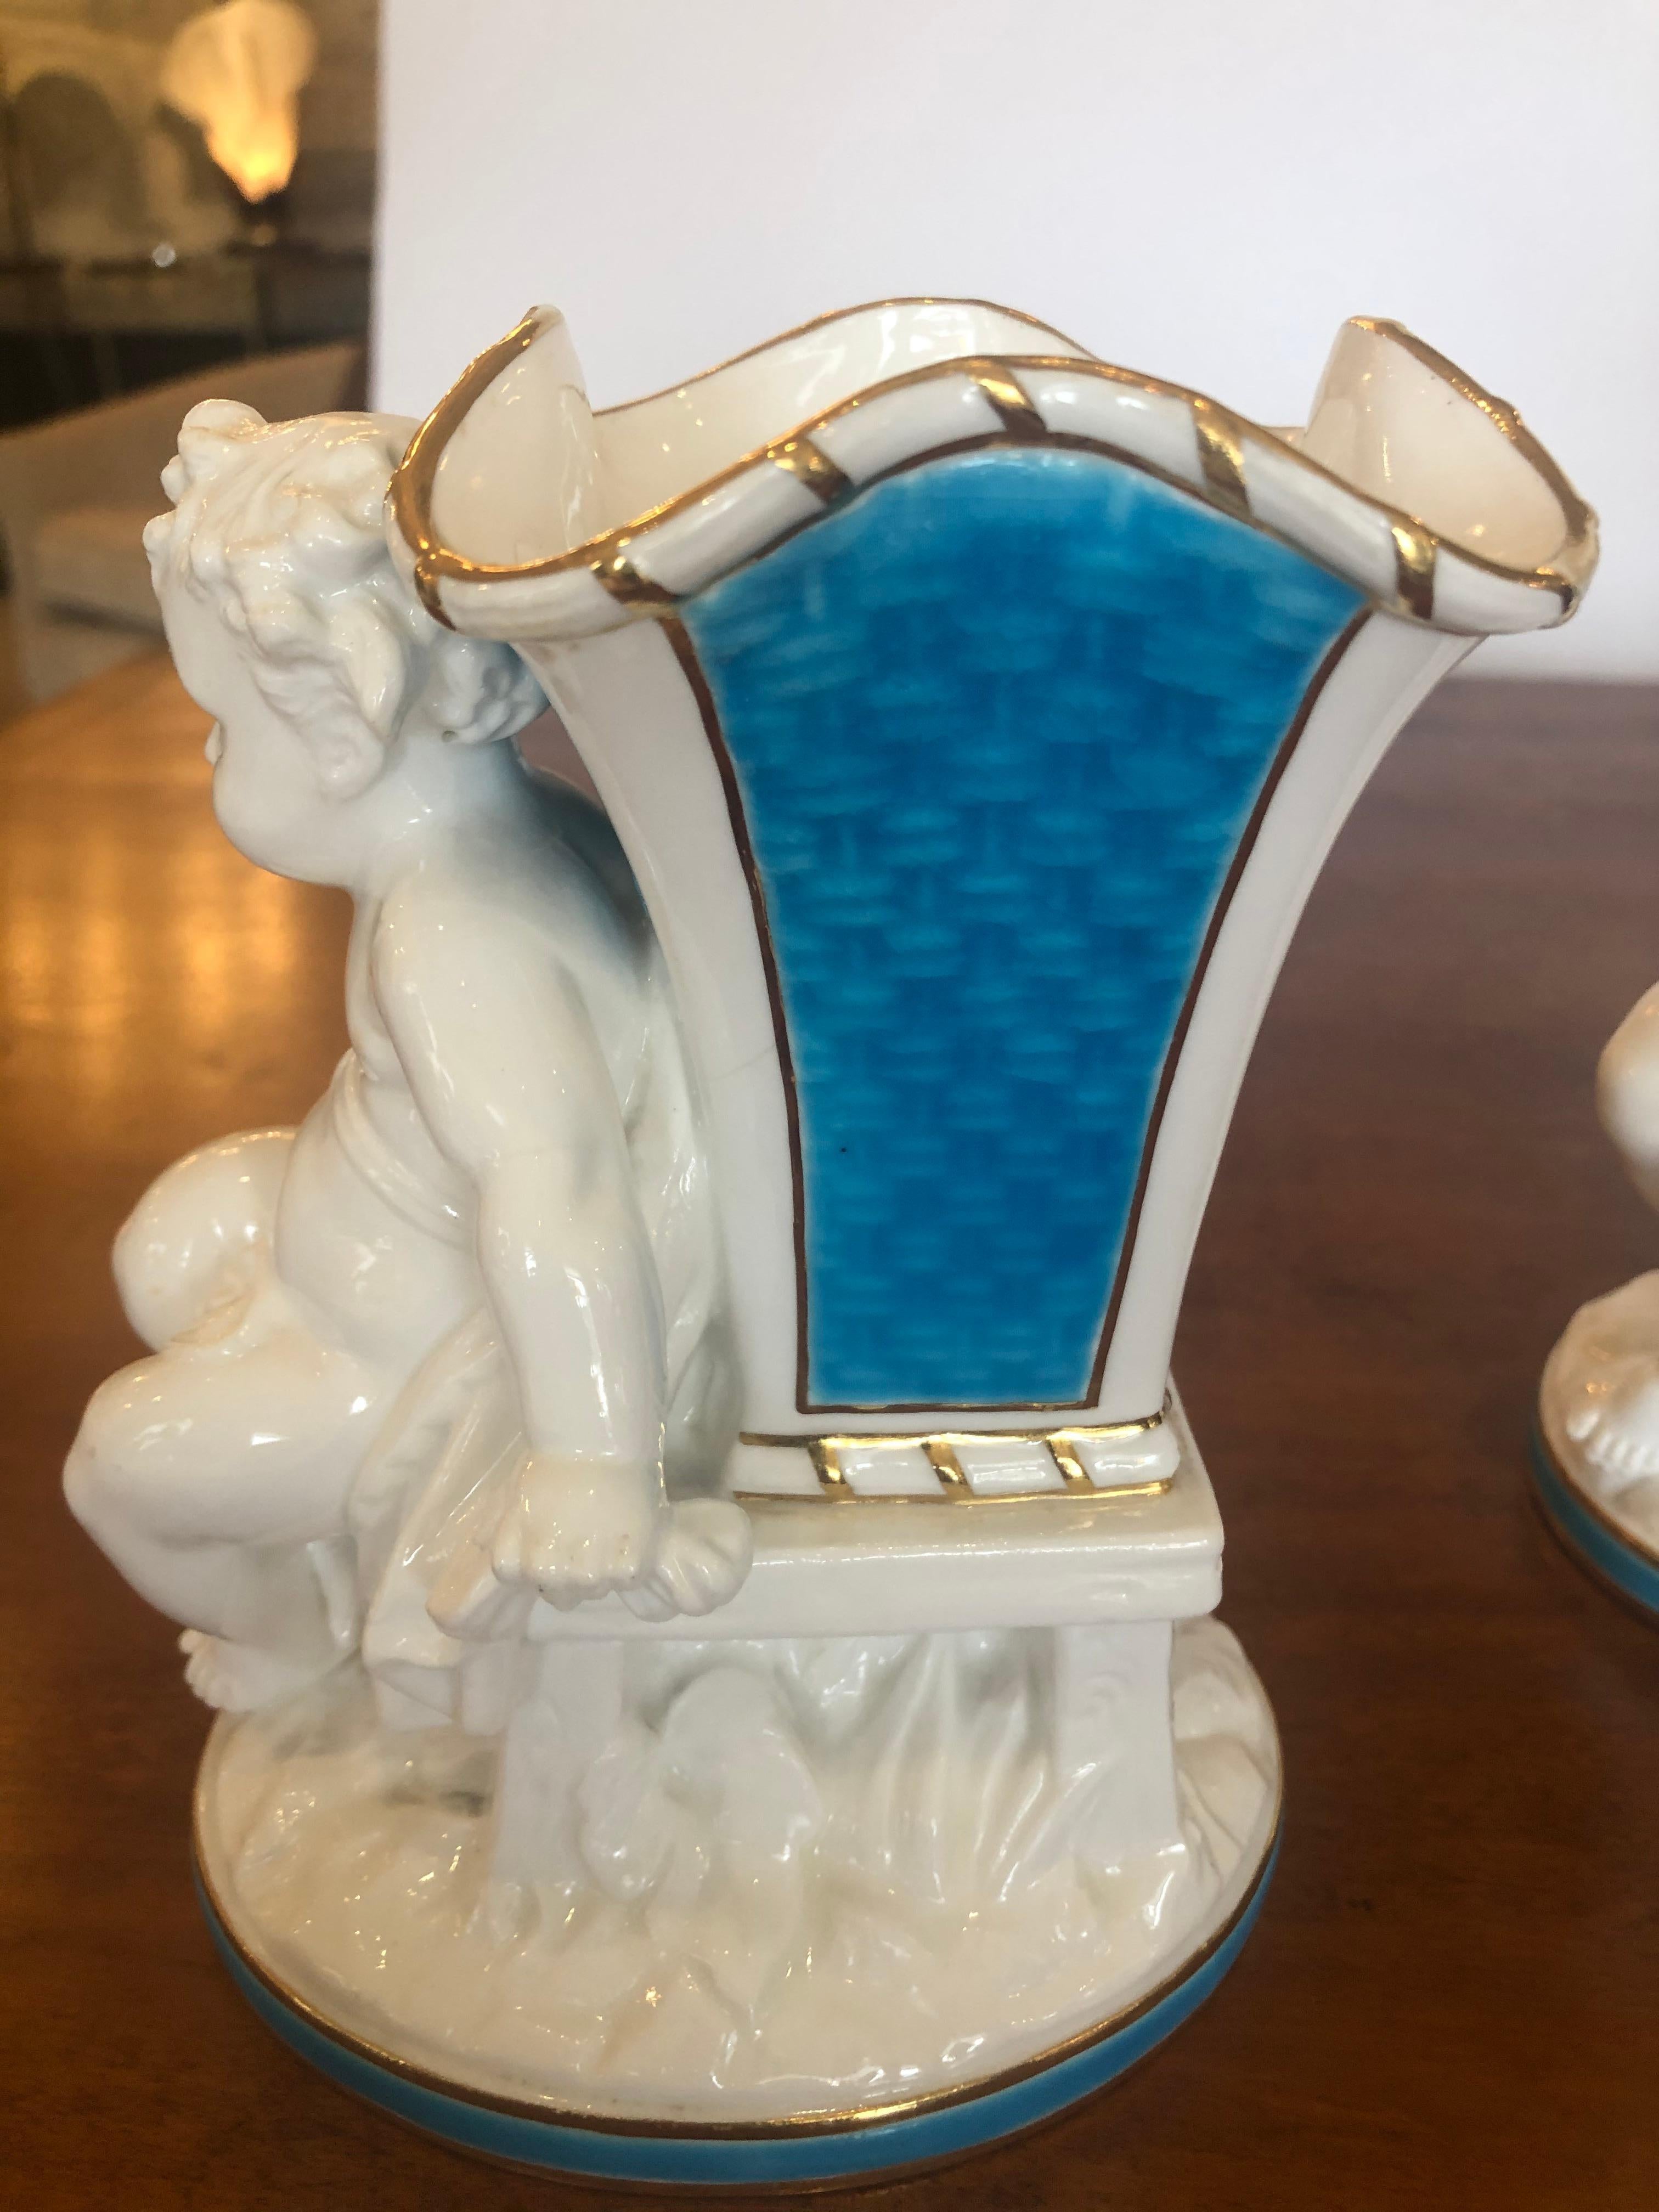 Superb Rare Pair of Cherub Minton Caldwell Tiffany Blue and White Spill Vases For Sale 11